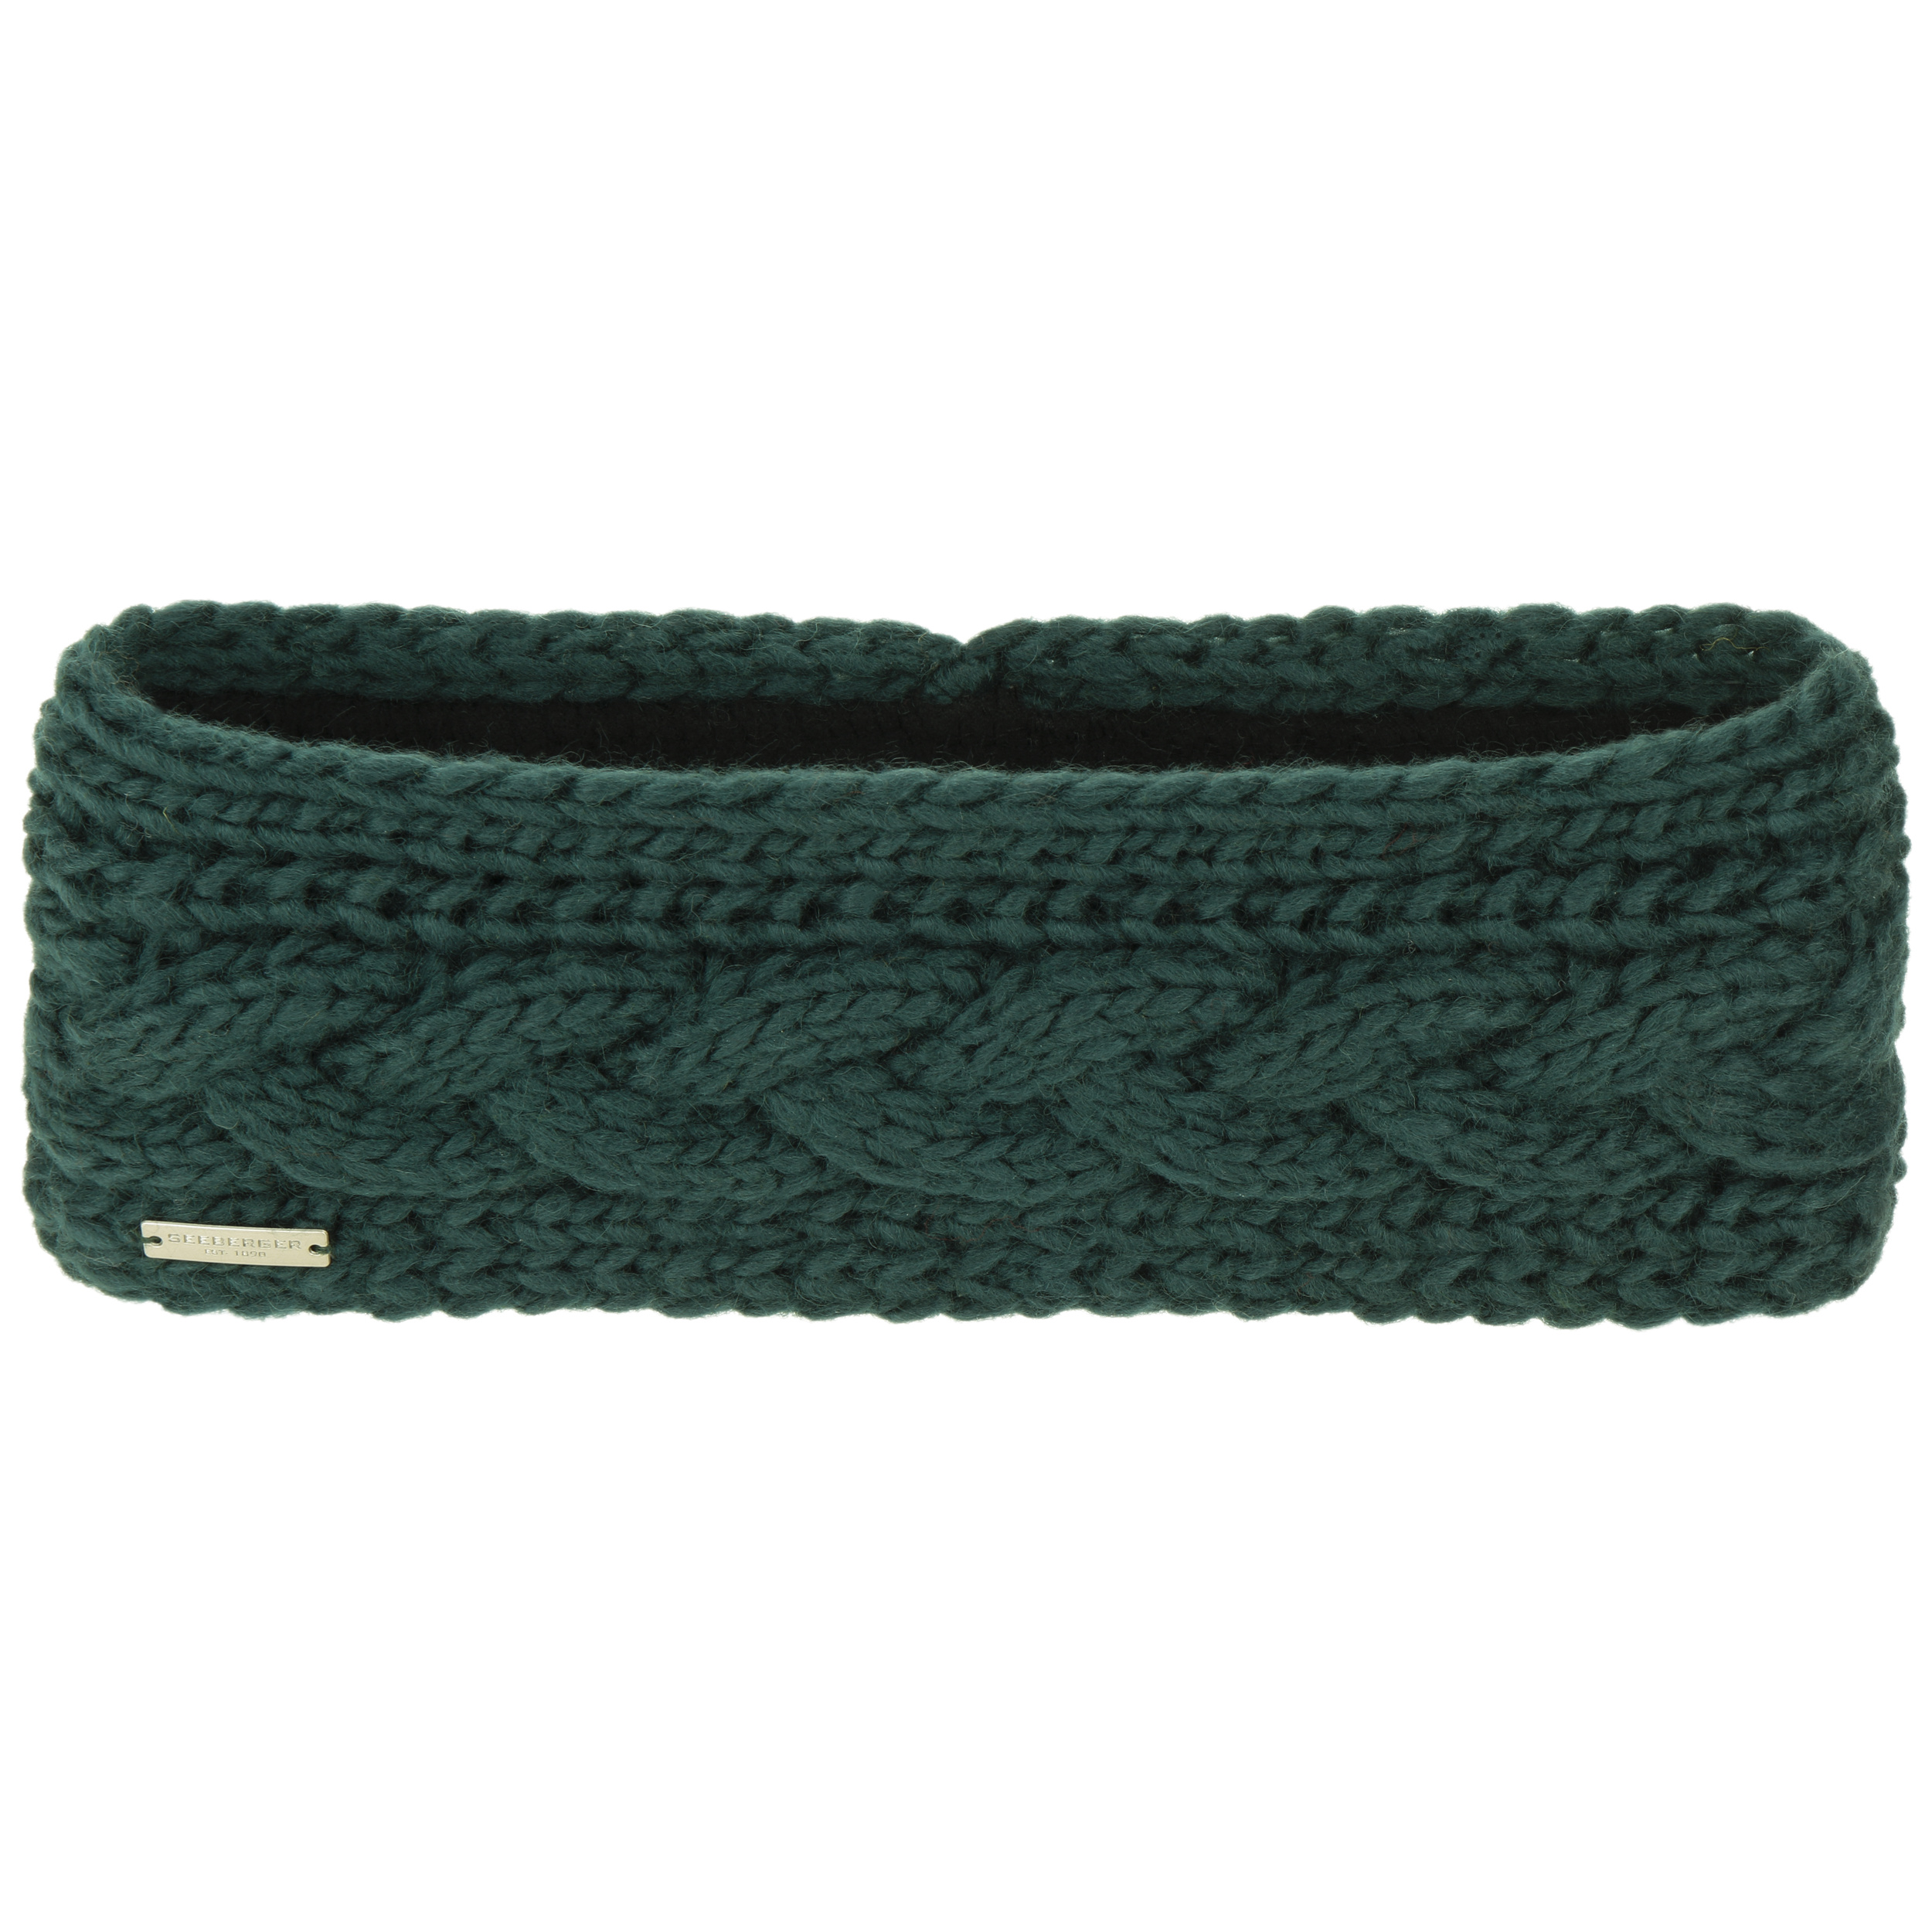 Classic Cable Knit Stirnband by Seeberger - 19,95 €